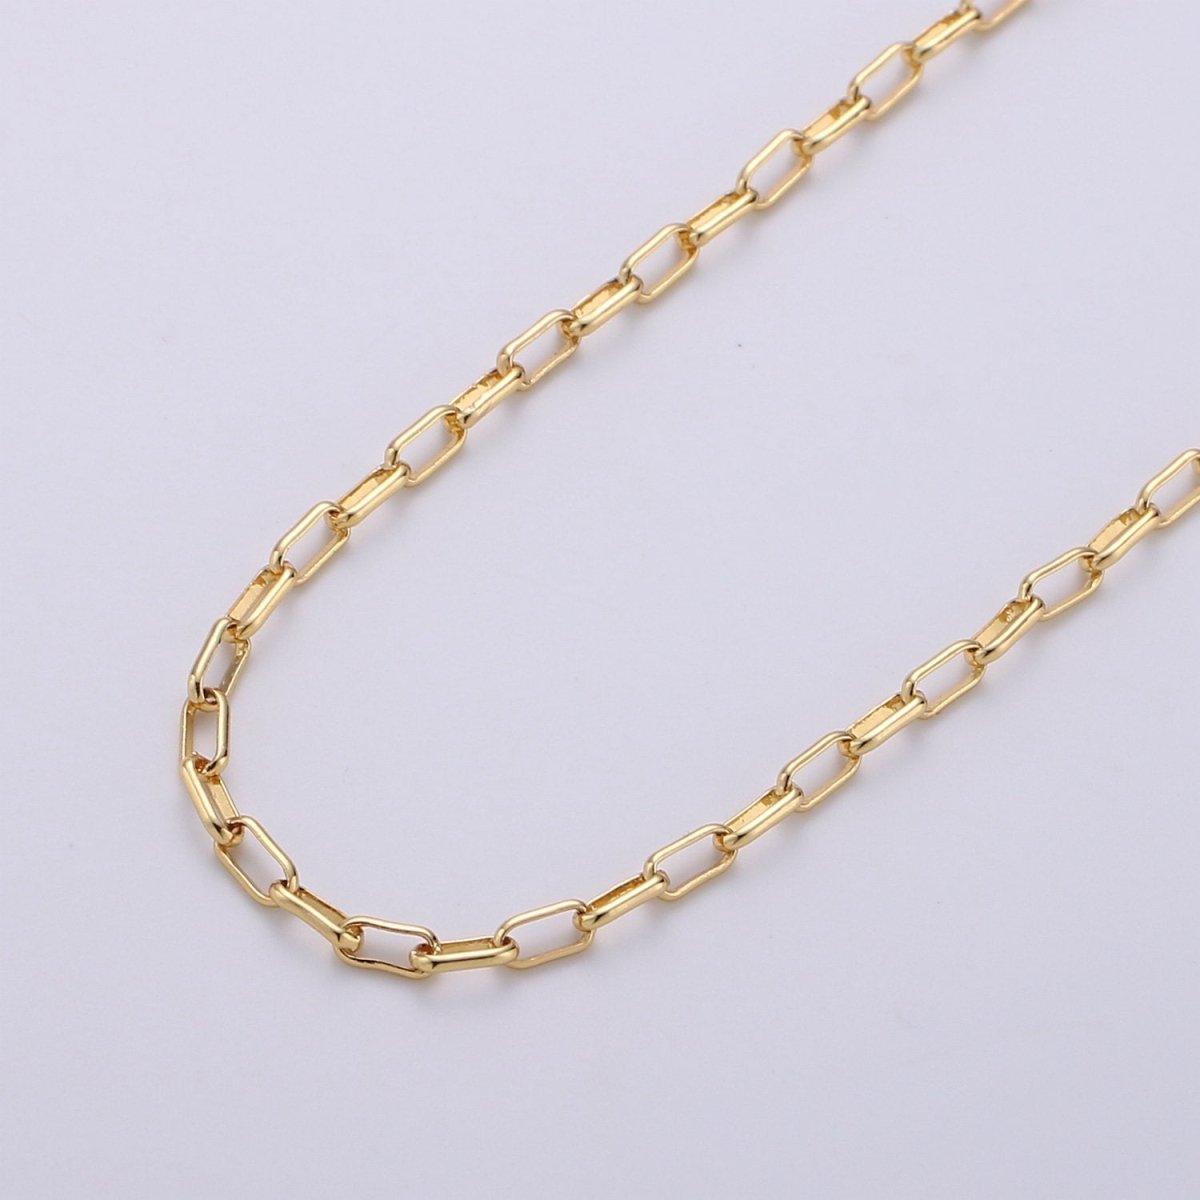 24K Gold Filled Paper Clip Chain, Elongated Rectangle Oval Paper Clip Chain, 3mm Chain By Yard, Unfinished Chain For DIY, Jewelry Supply Component | ROLL-228 Clearance Pricing - DLUXCA